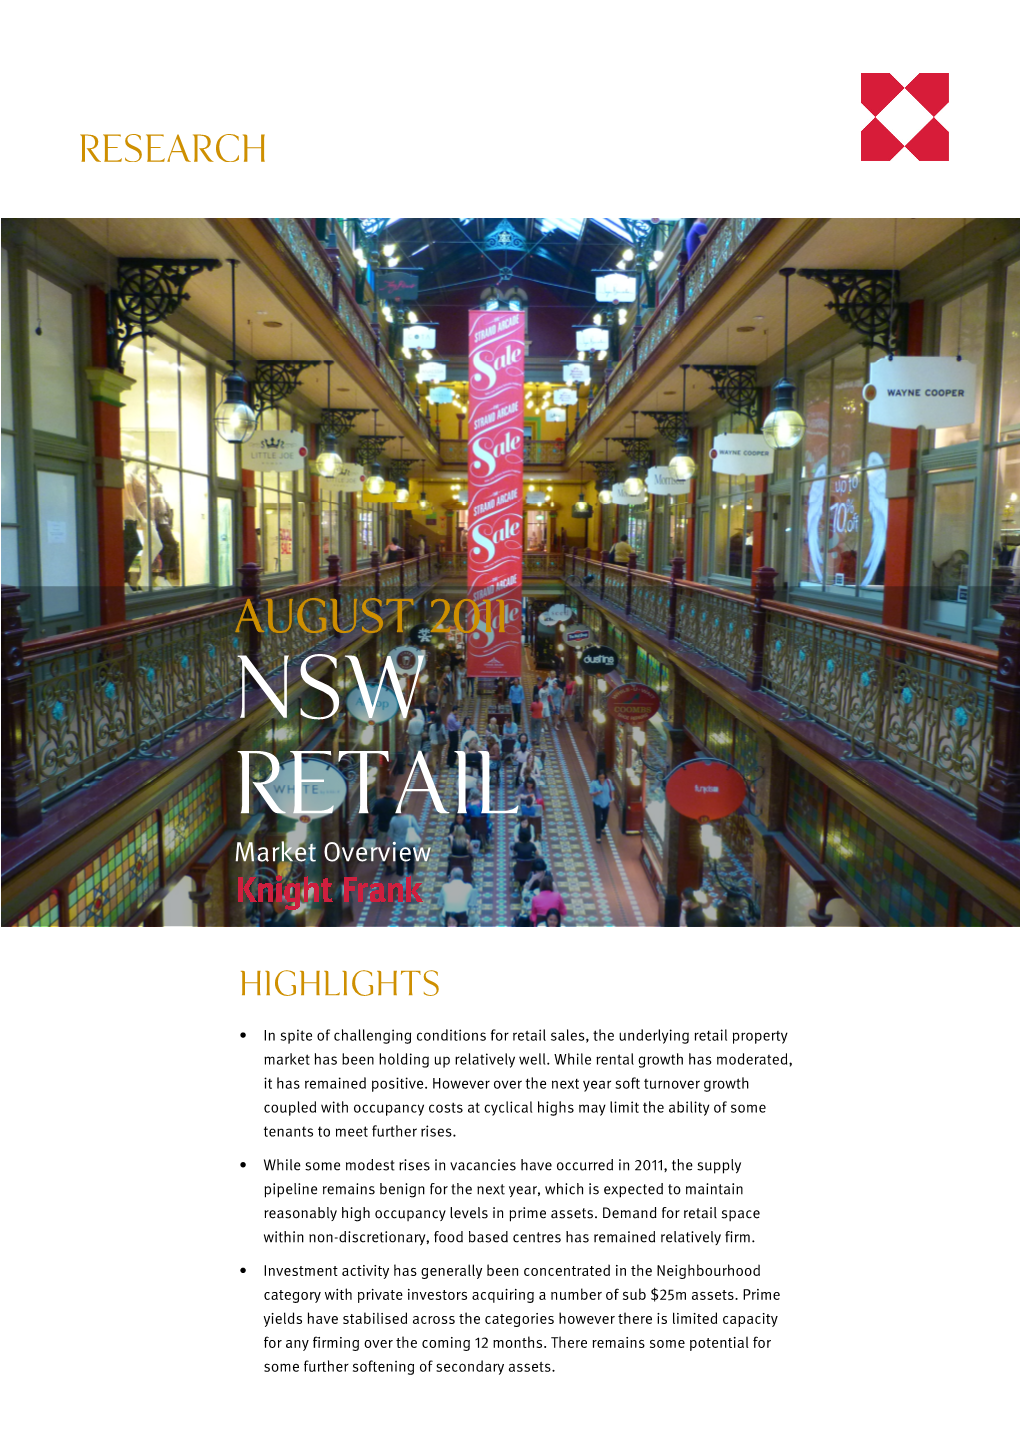 NSW RETAIL Market Overview